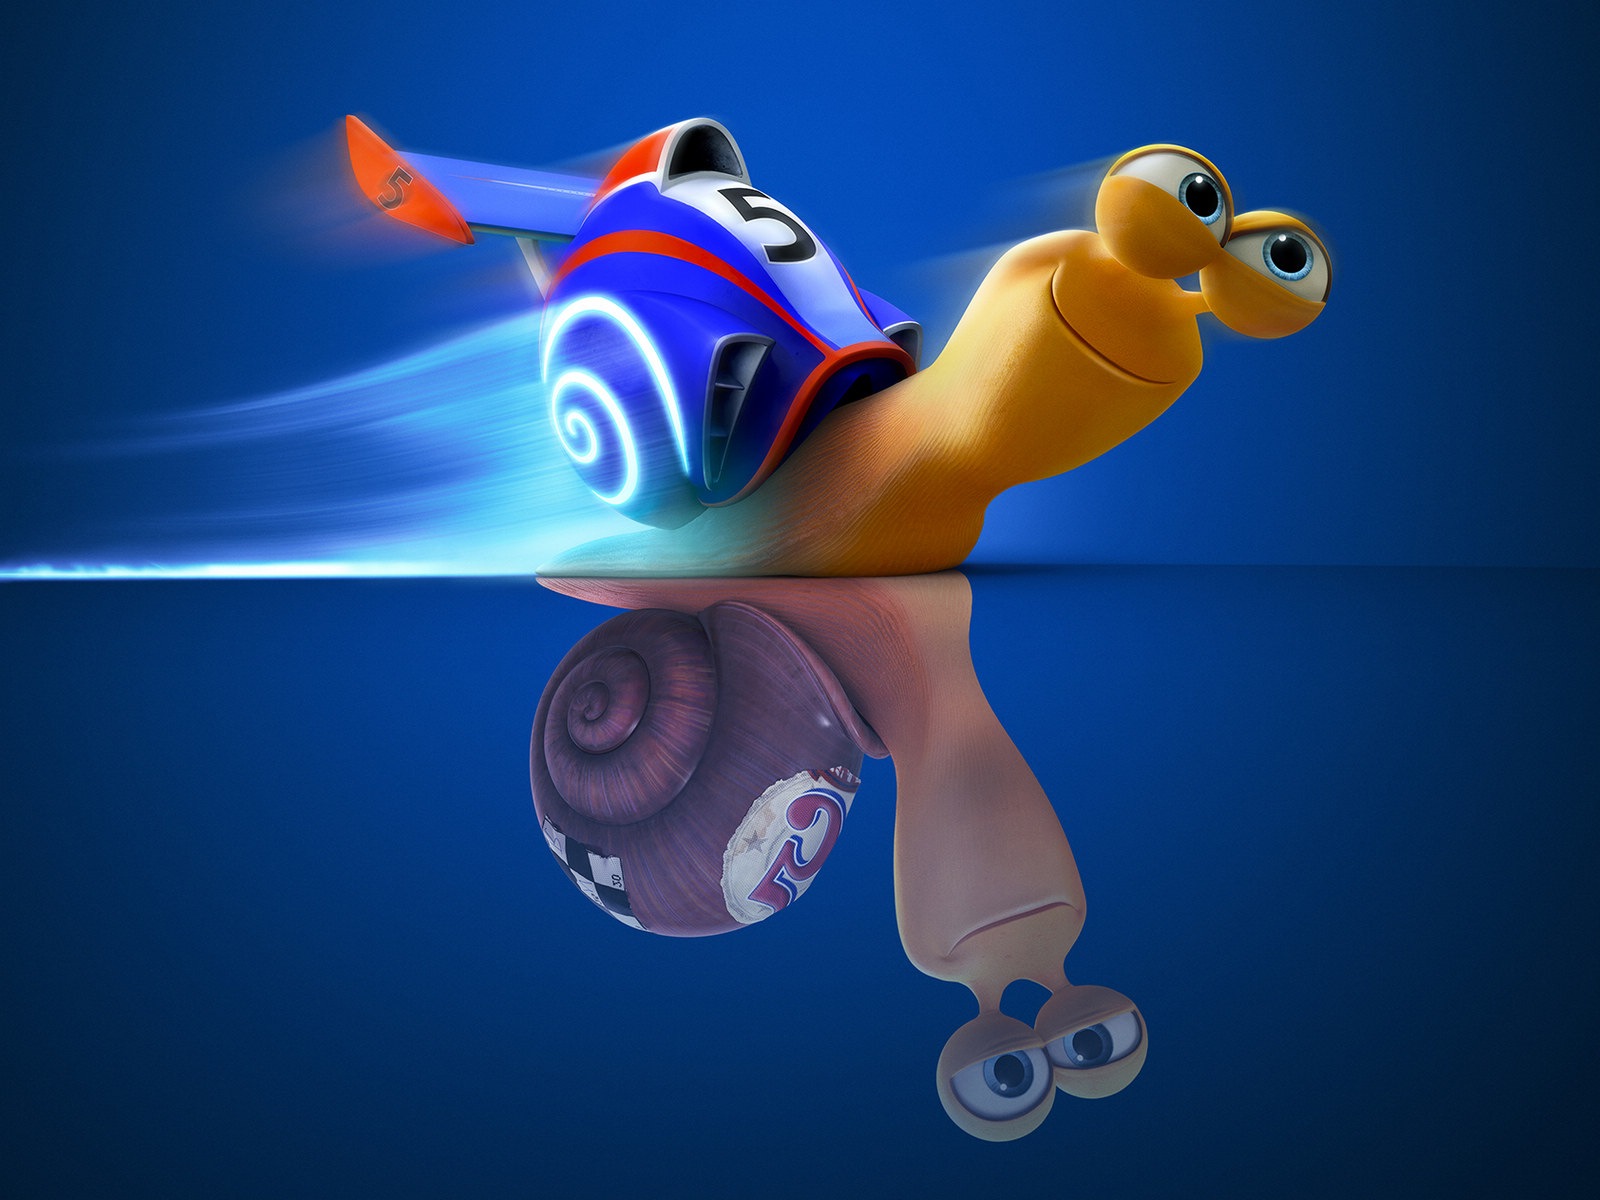 Turbo 3D movie HD wallpapers #4 - 1600x1200